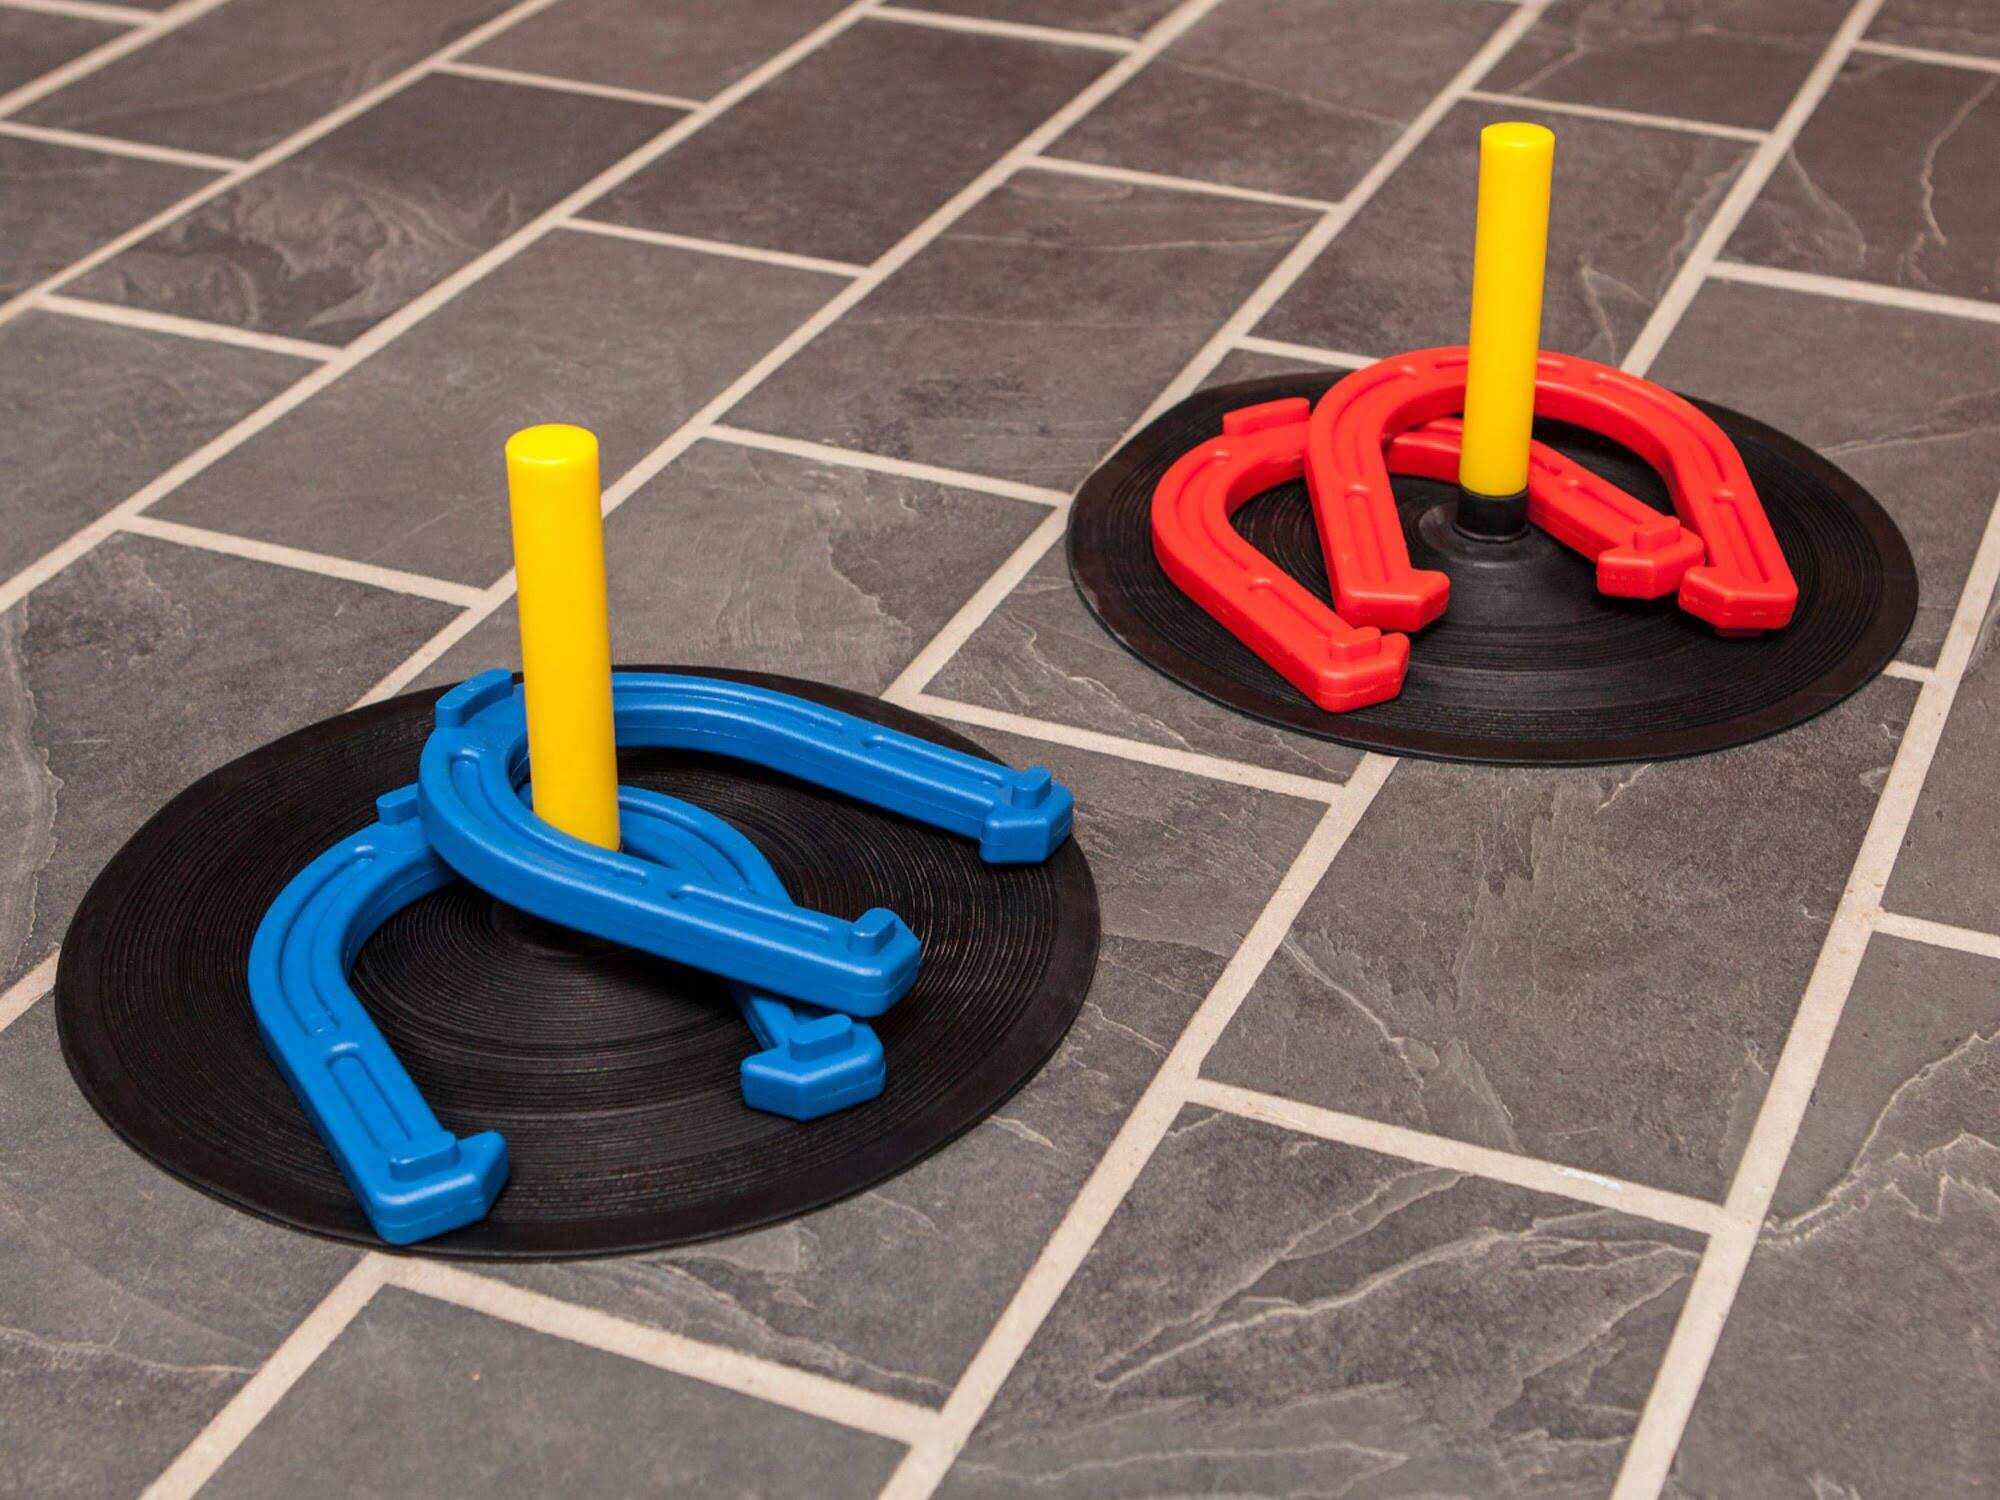 Horseshoe Set Review: A Fun Outdoor Game for All Ages